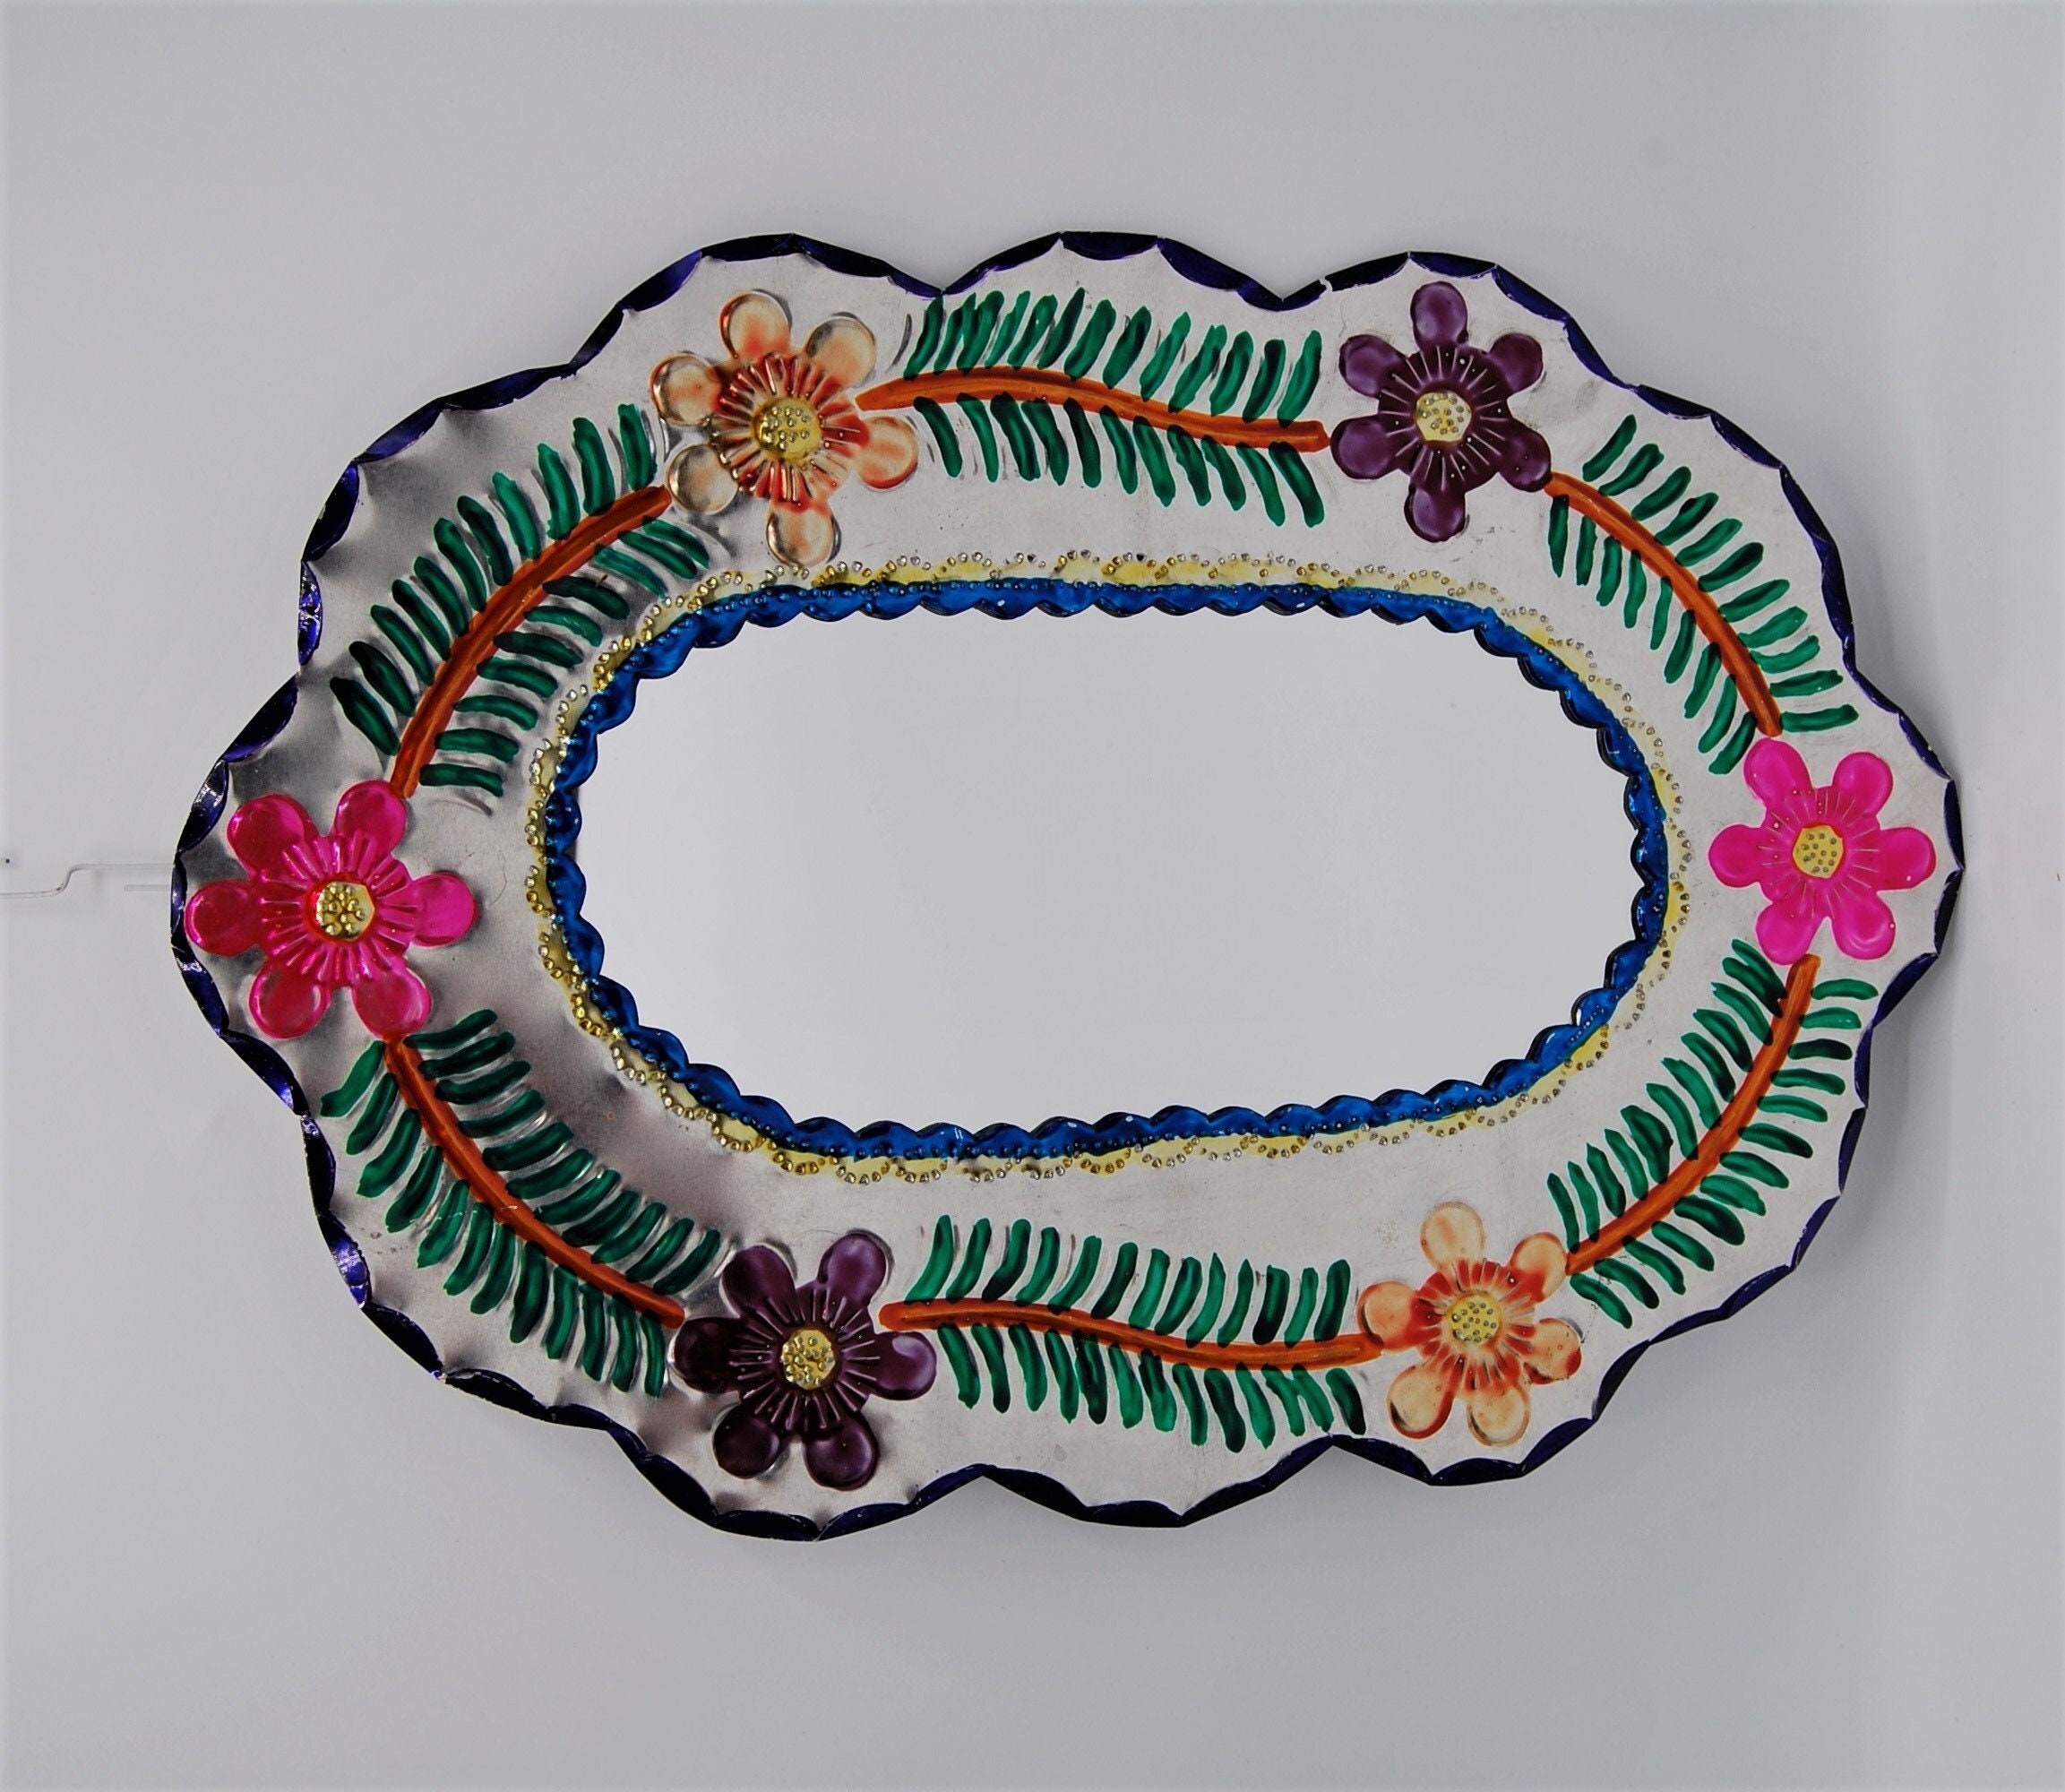 Decorative Oval and Arch Mexican Mirror Frames – Custom Made Products